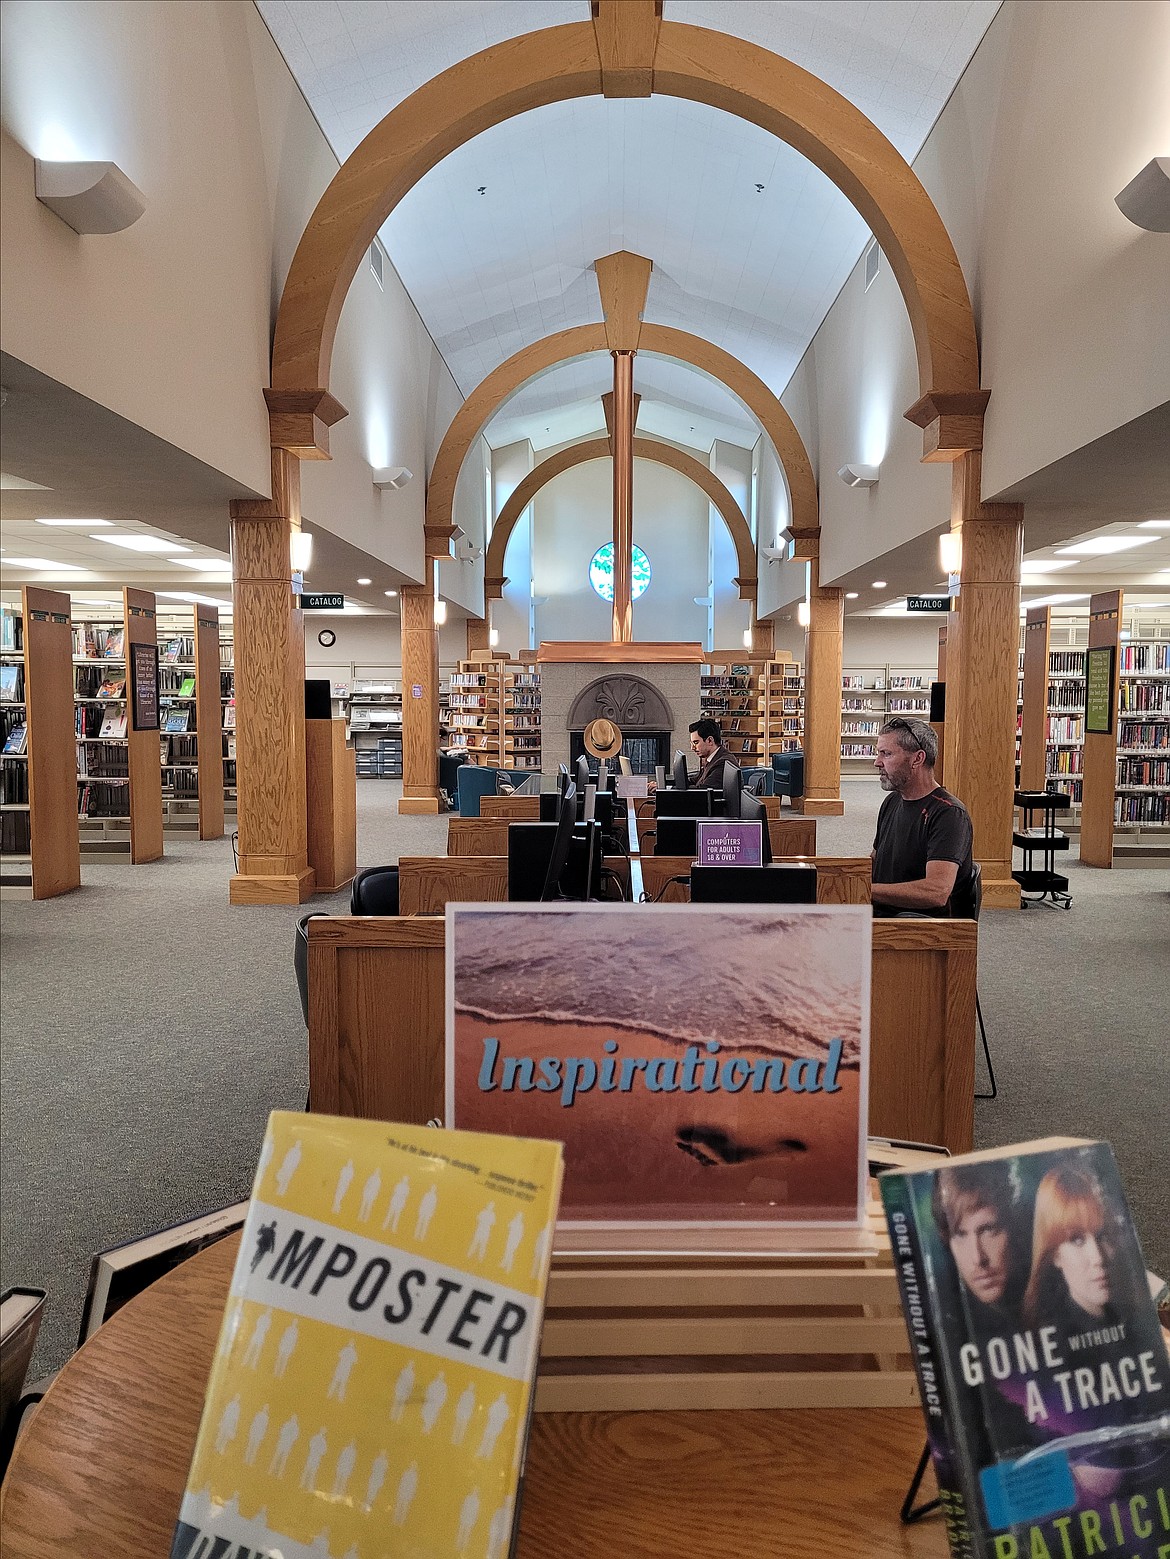 Patrons are seen beneath the wooden arches of the Post Falls Library in July. The Post Falls Library joined the Community Library Network in 2010 after residents voted to support the inclusion of the city of Post Falls into the boundaries of the Consolidated Free Library District.